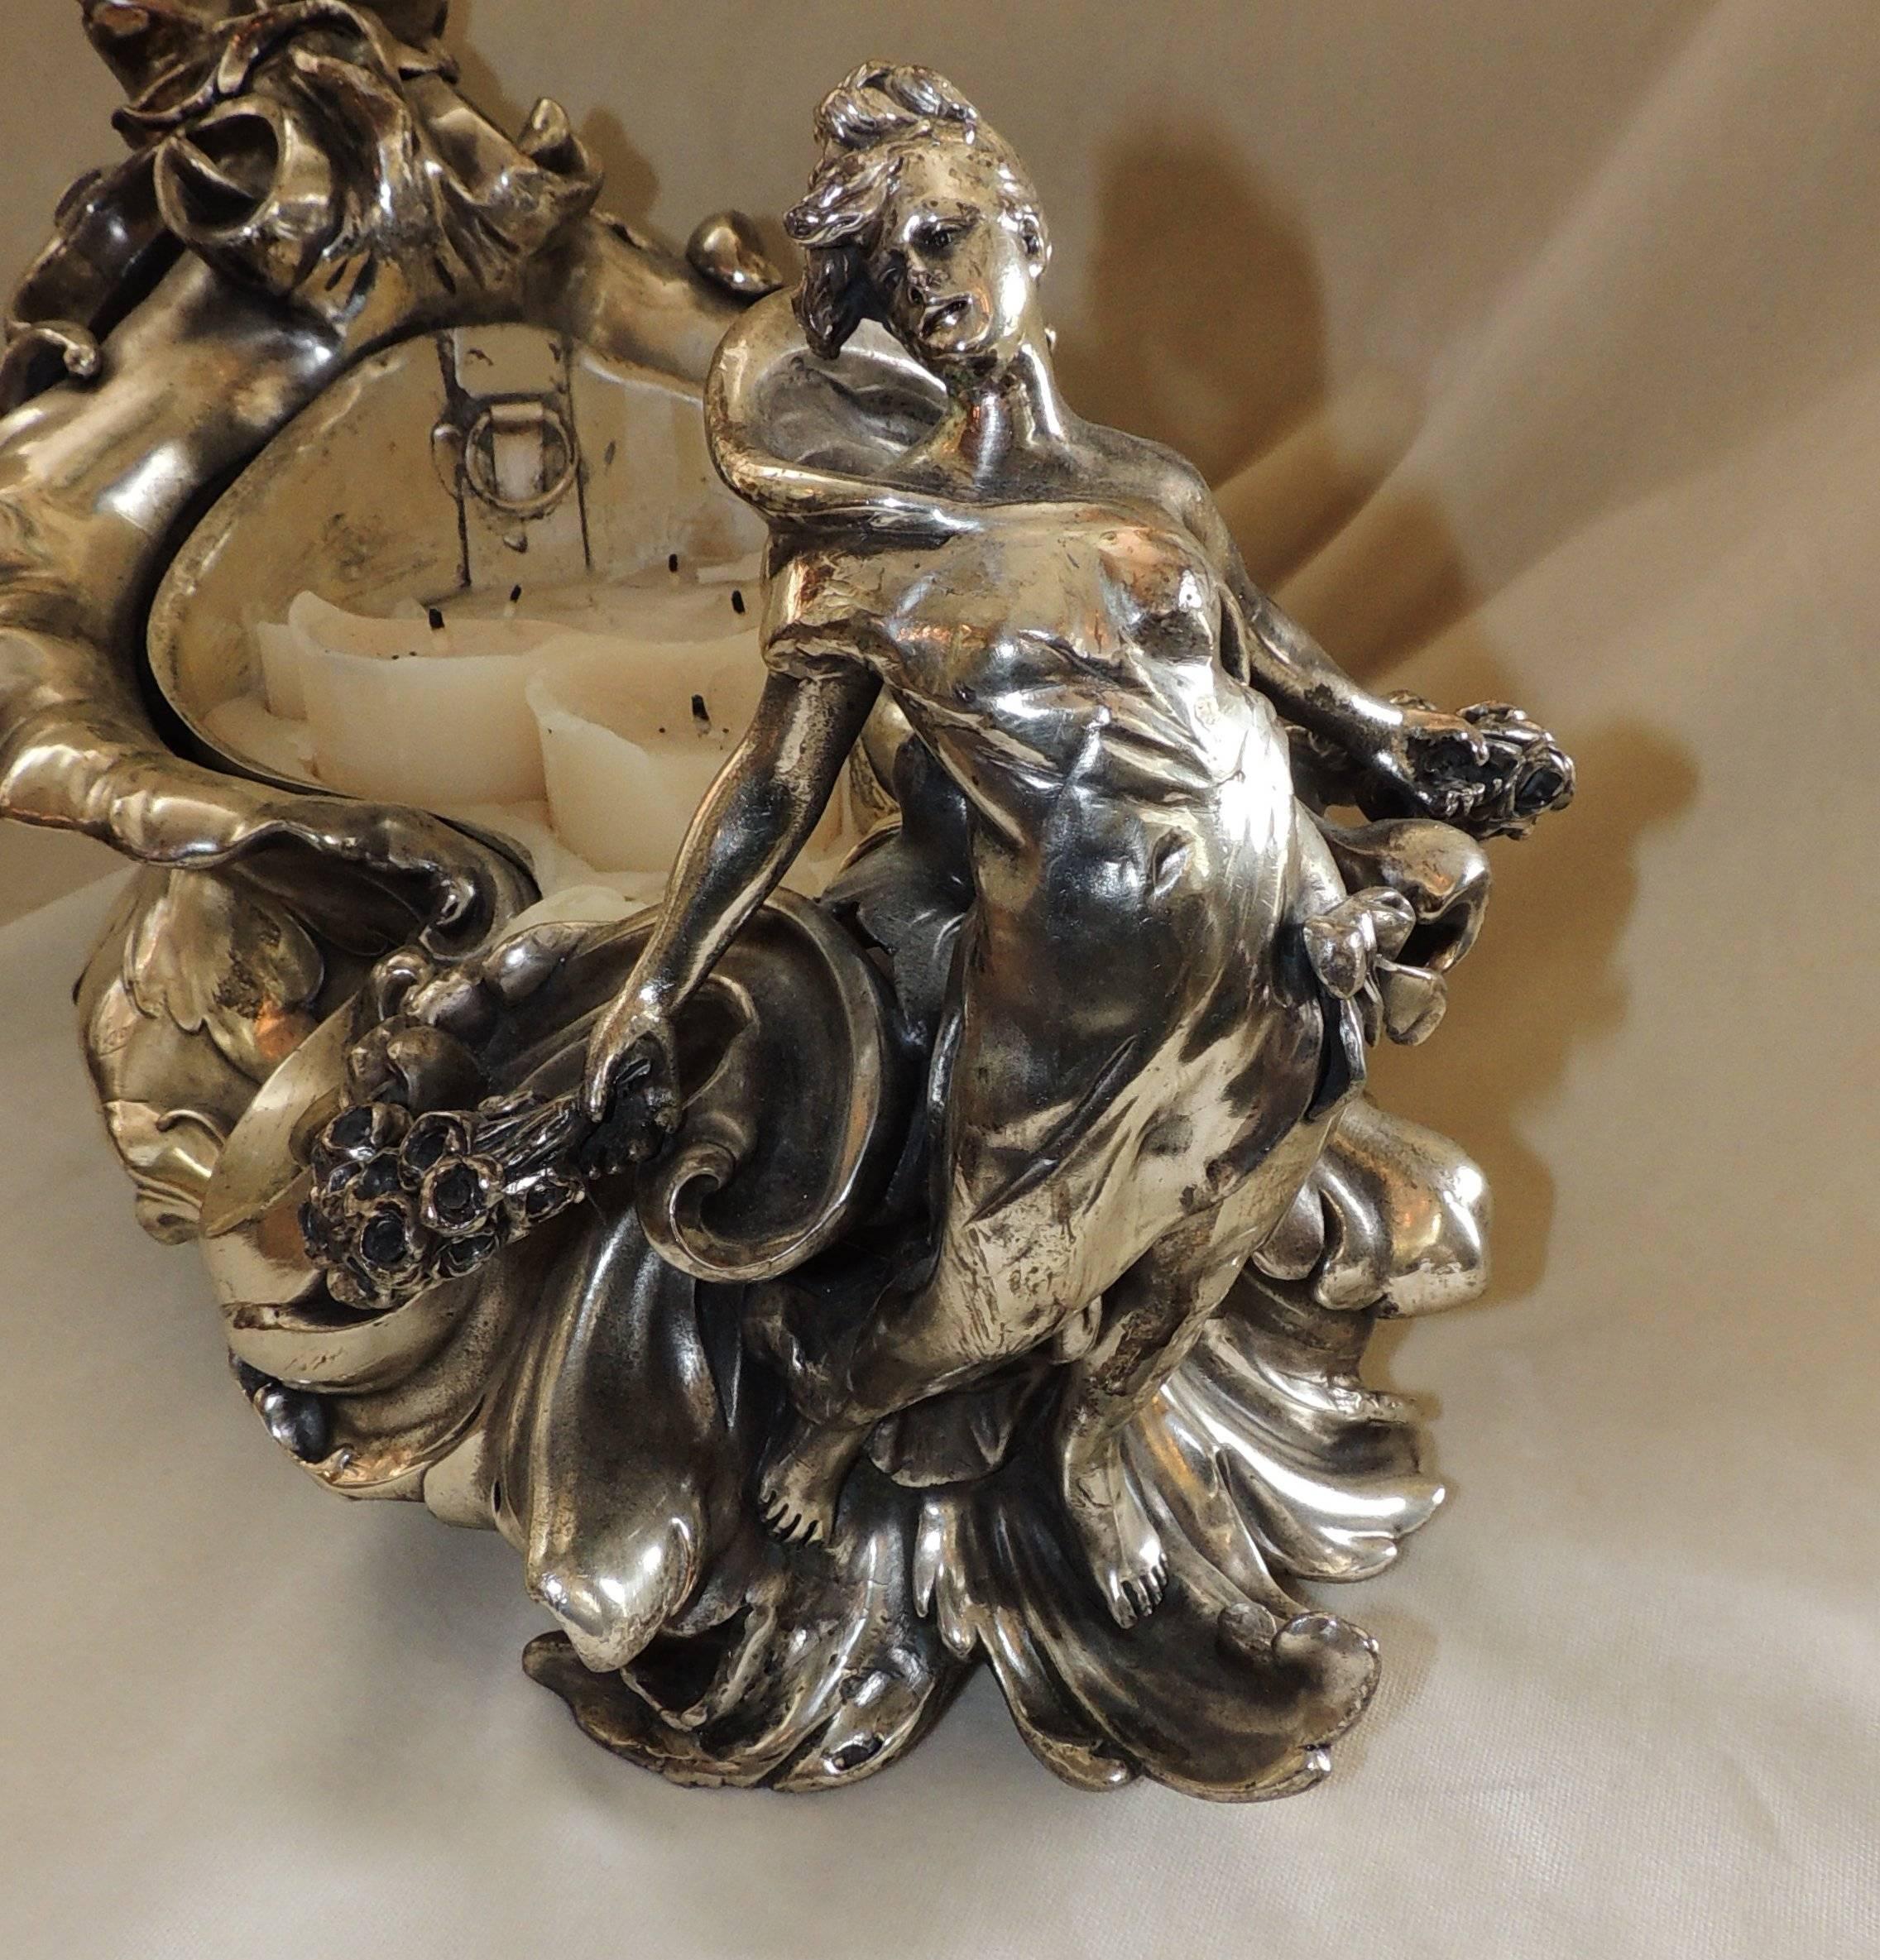 Signed Art Nouveau / Deco silver plated planter centrepiece with liner, decorated with a mermaid, waves, flowers in excellent form flow and details. Signed A. k. Nelson, we believe this piece to be WMF.

Measures: 20" L x 11" W x